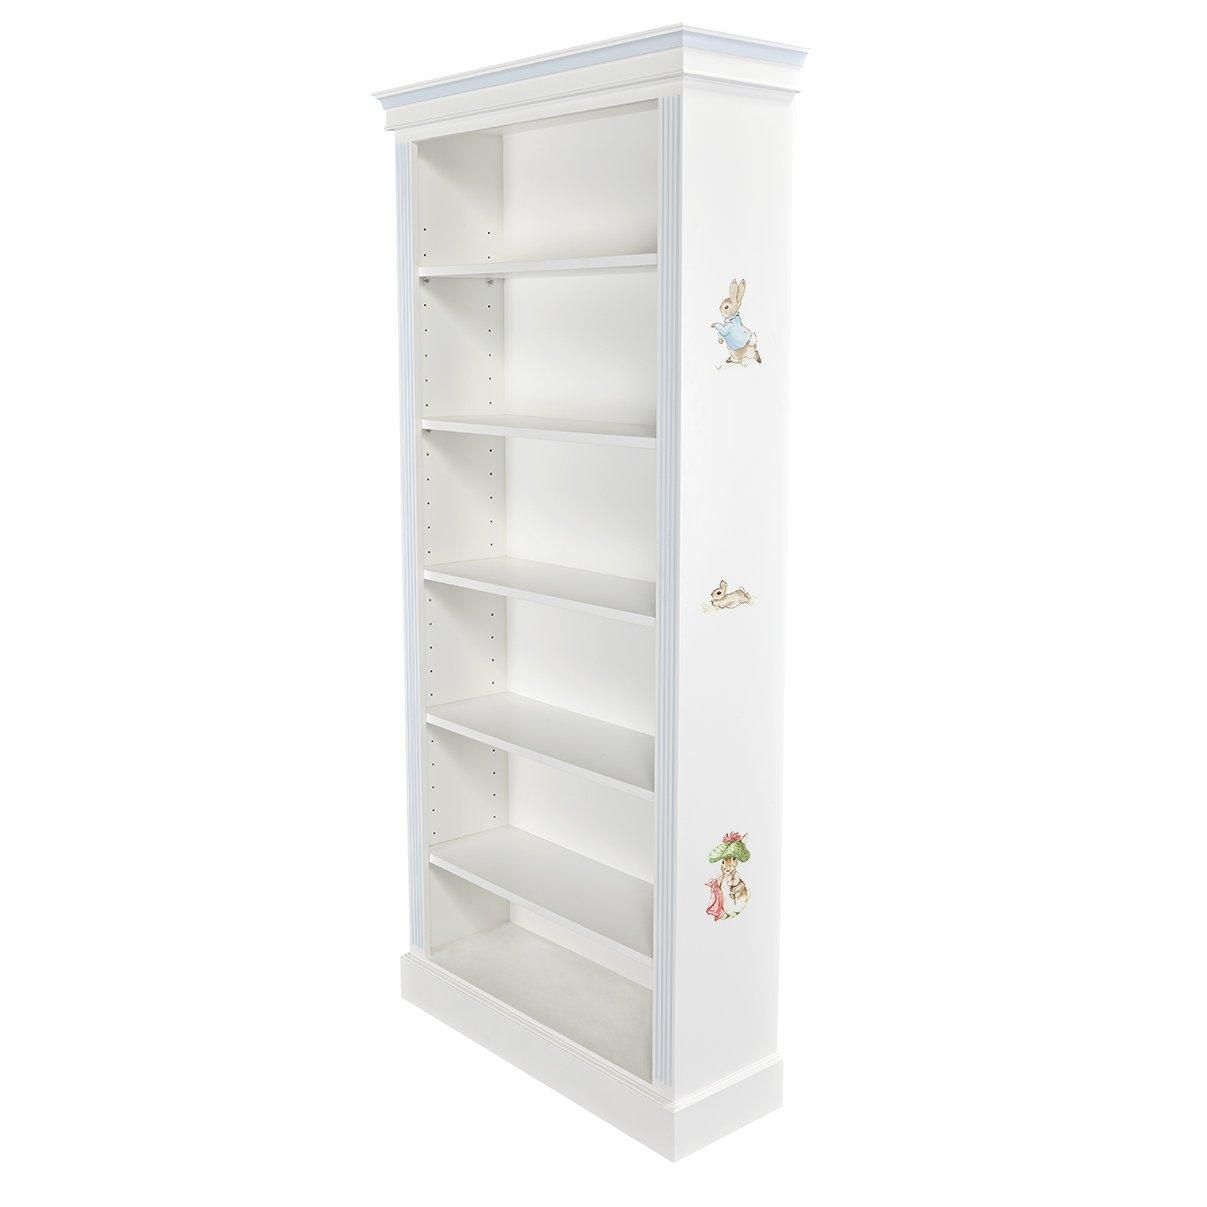 Large kids bedroom bookcase with Beatrix Potter paintings | Dragons of Walton Street